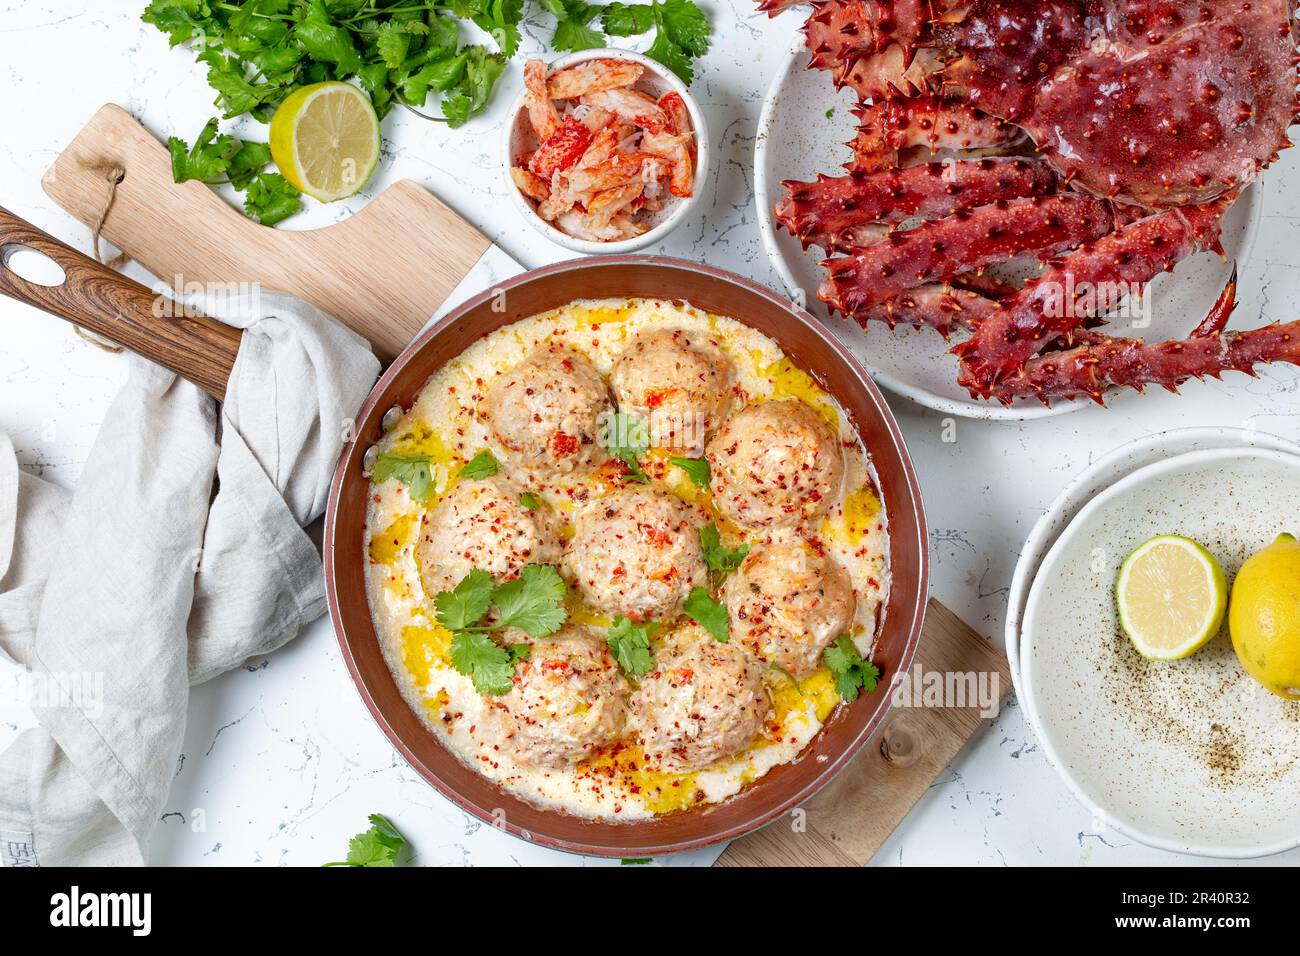 CRABMEATBALLS crab meatballs in white creamy sauce in red pan, whole king crab, cilantro, lemon and white wine on white backgrou Stock Photo